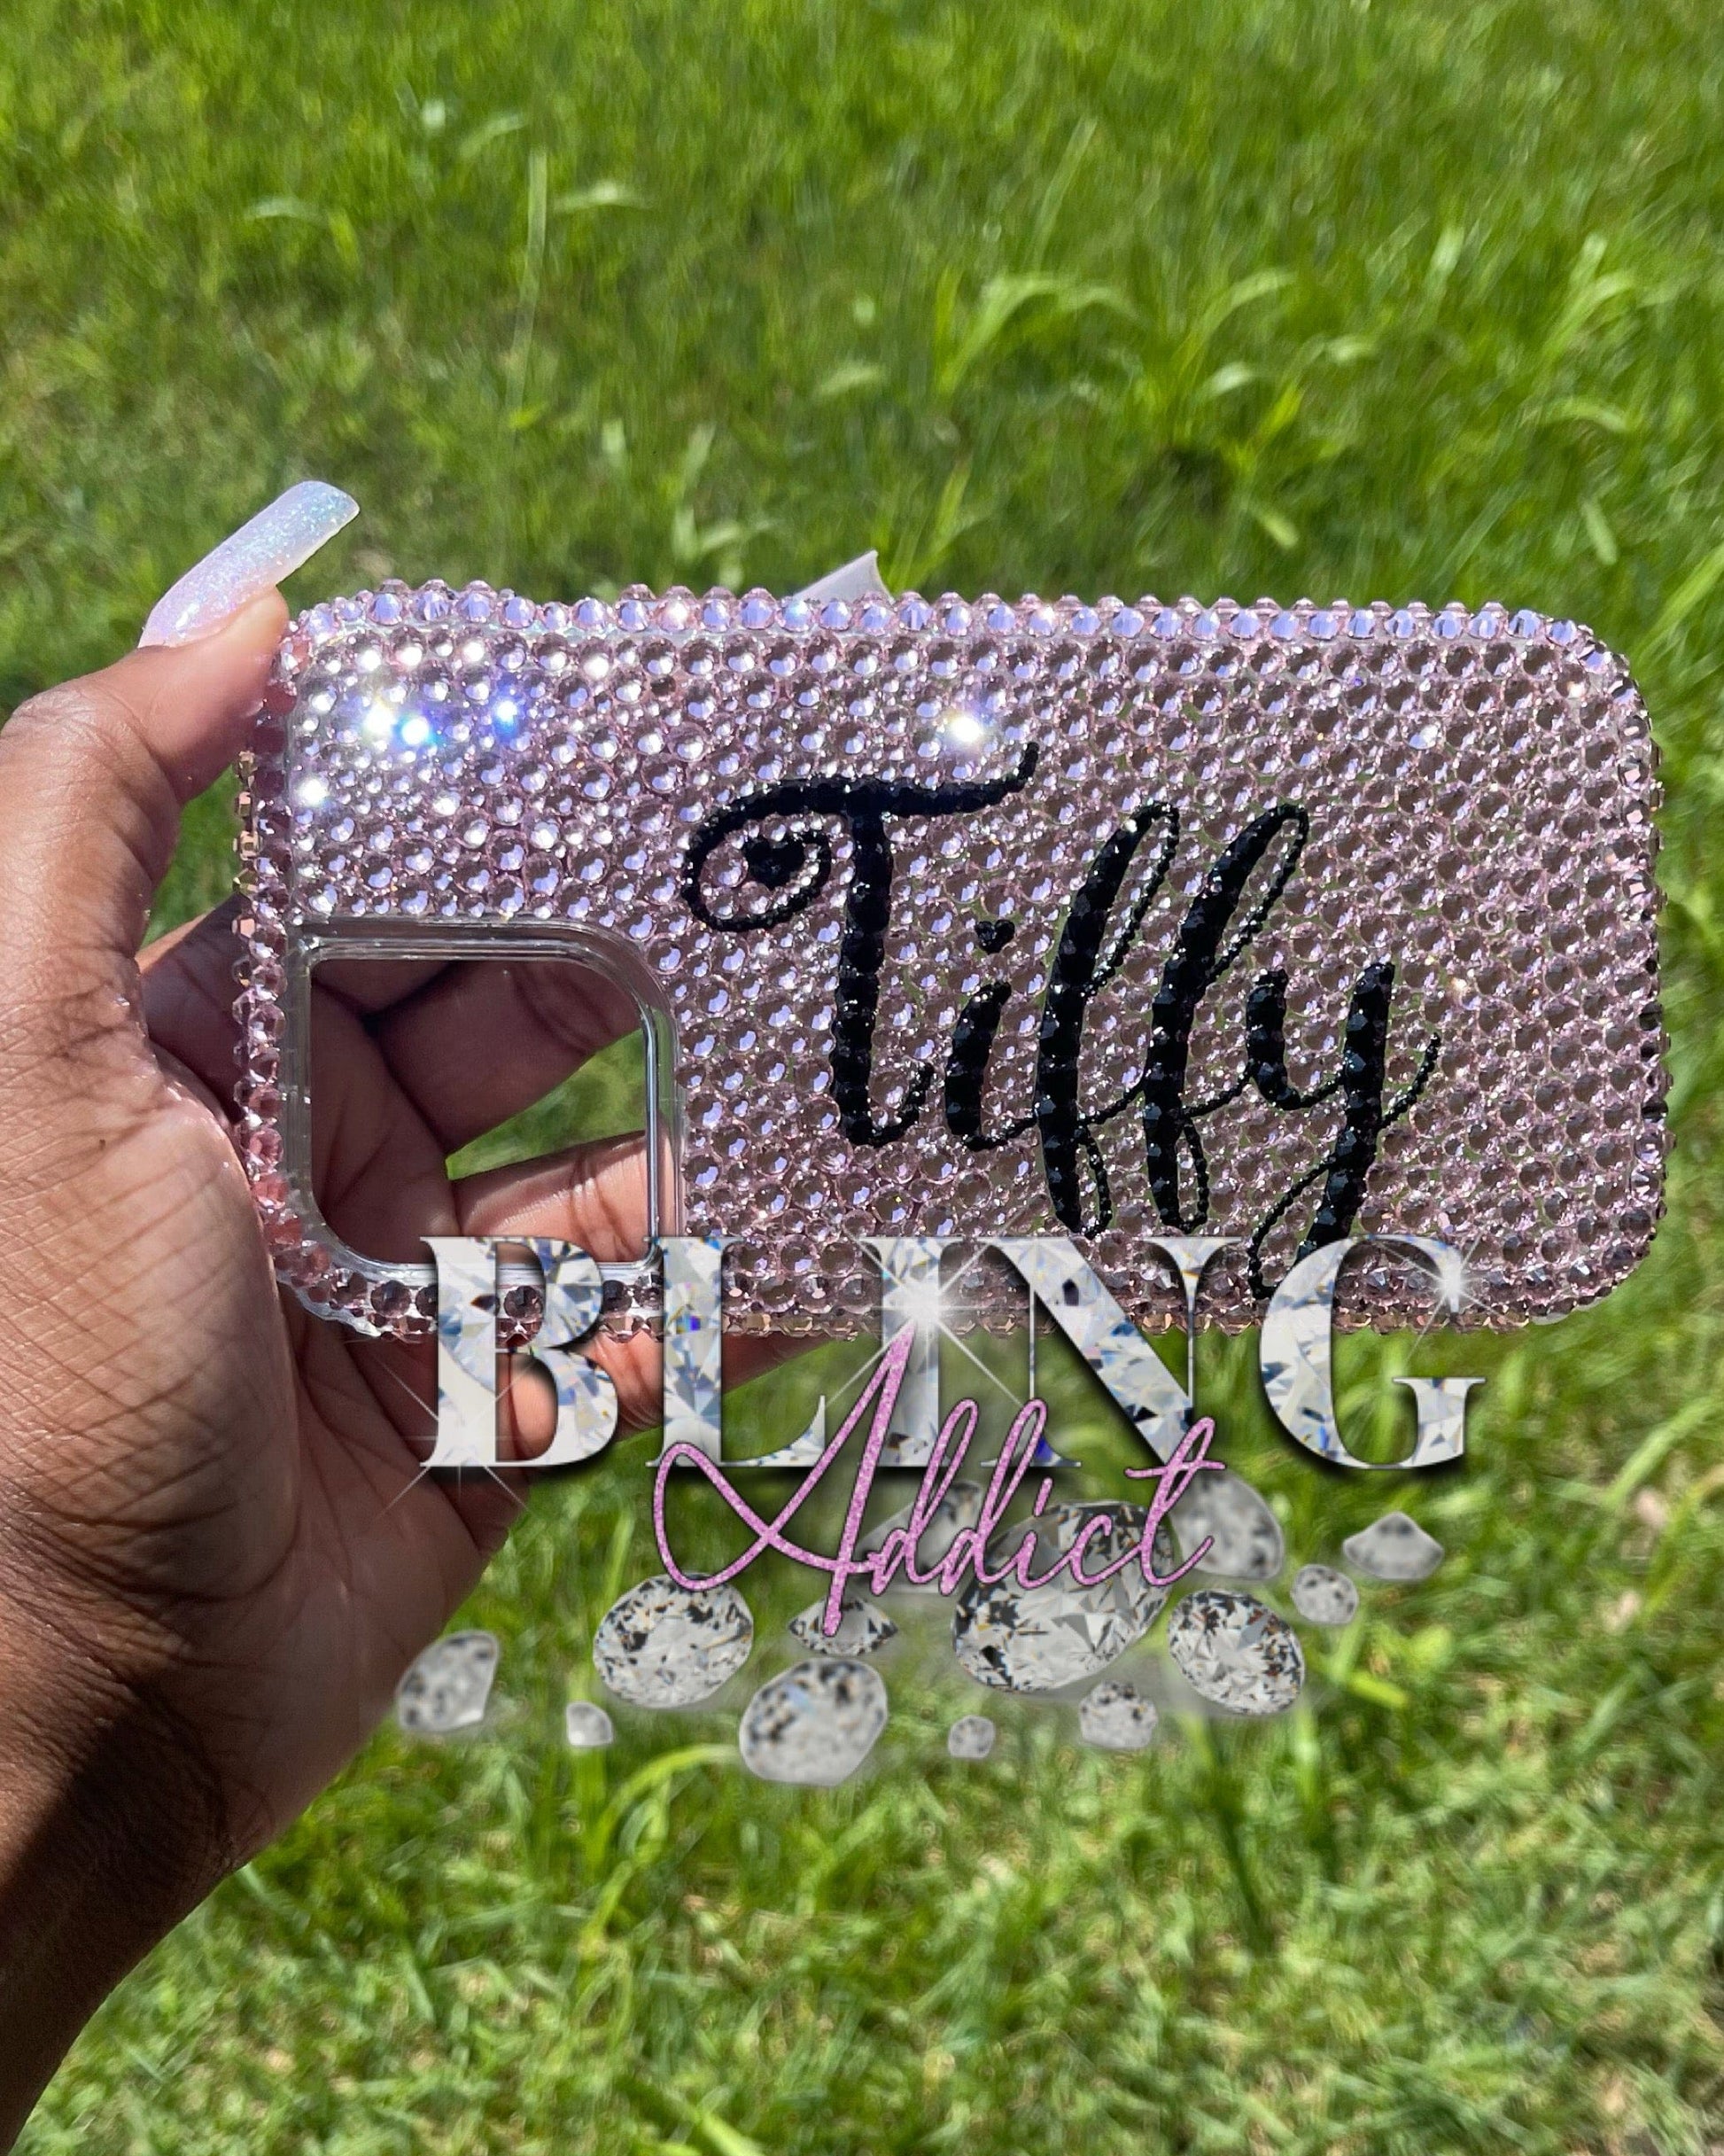 Name Cystalized Custom Phone Case Leave phone type in Notes Box during checkout by Bling Addict | BlingxAddict